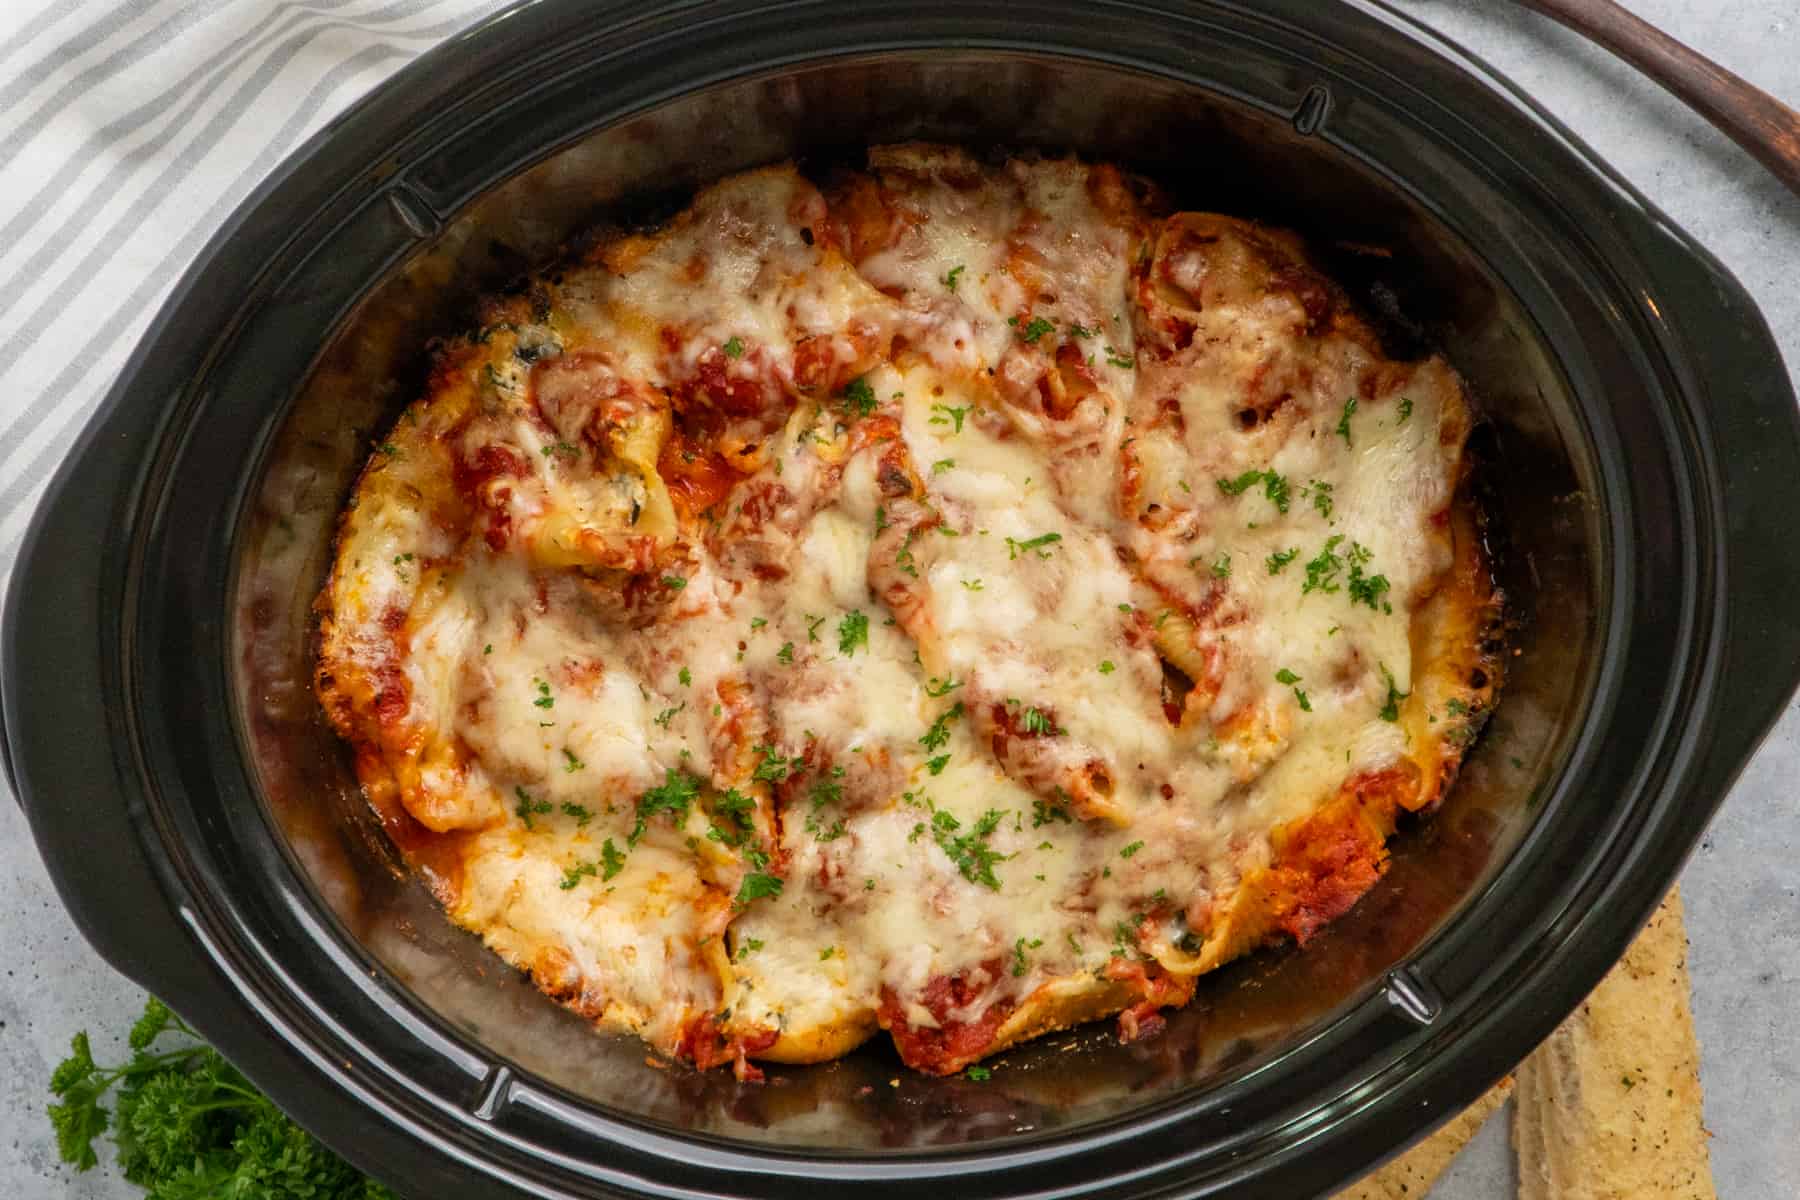 Crockpot stuffed shells cooked and garnished with parsley.